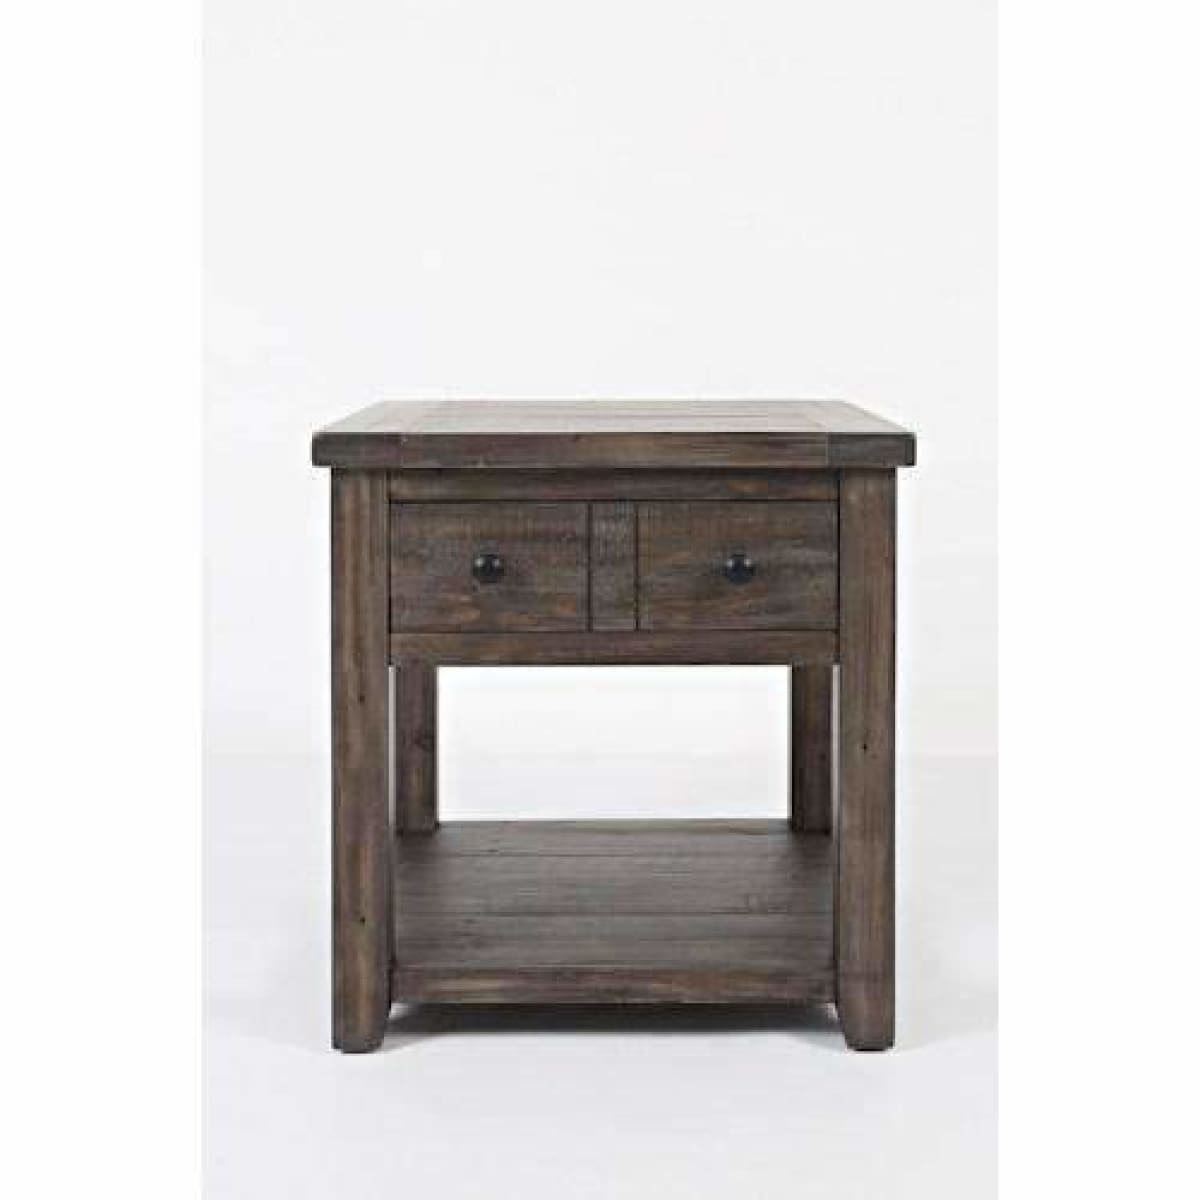 Madison County End Table - END TABLE/SIDE TABLE